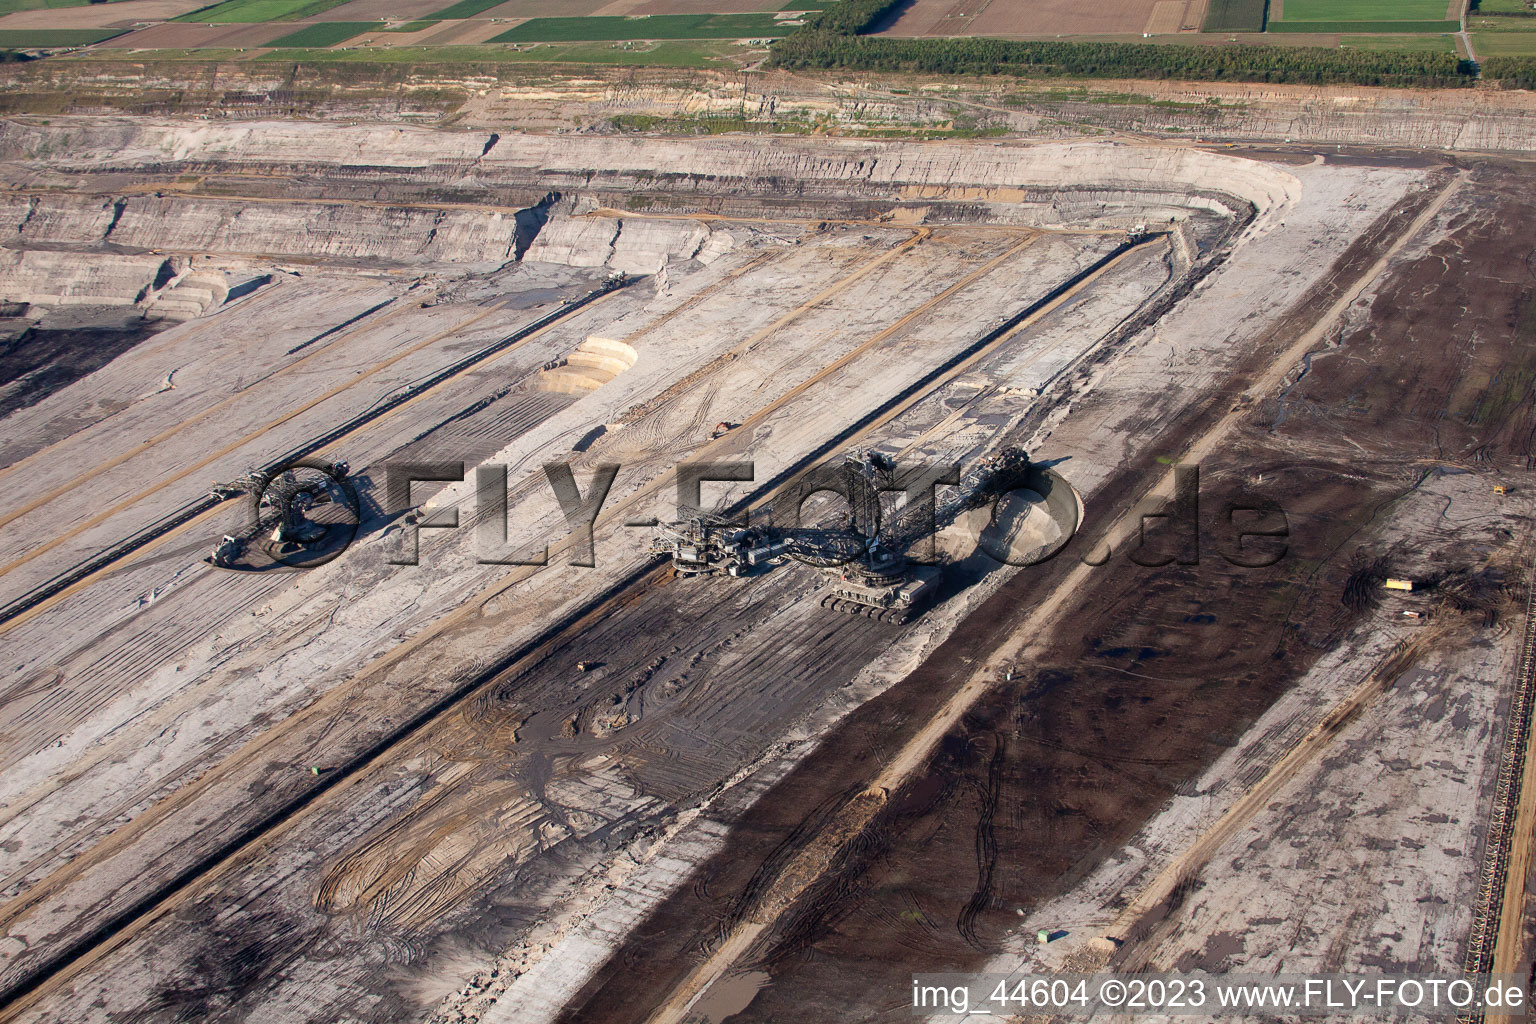 Opencast brown coal mining in Inden in the state North Rhine-Westphalia, Germany seen from above